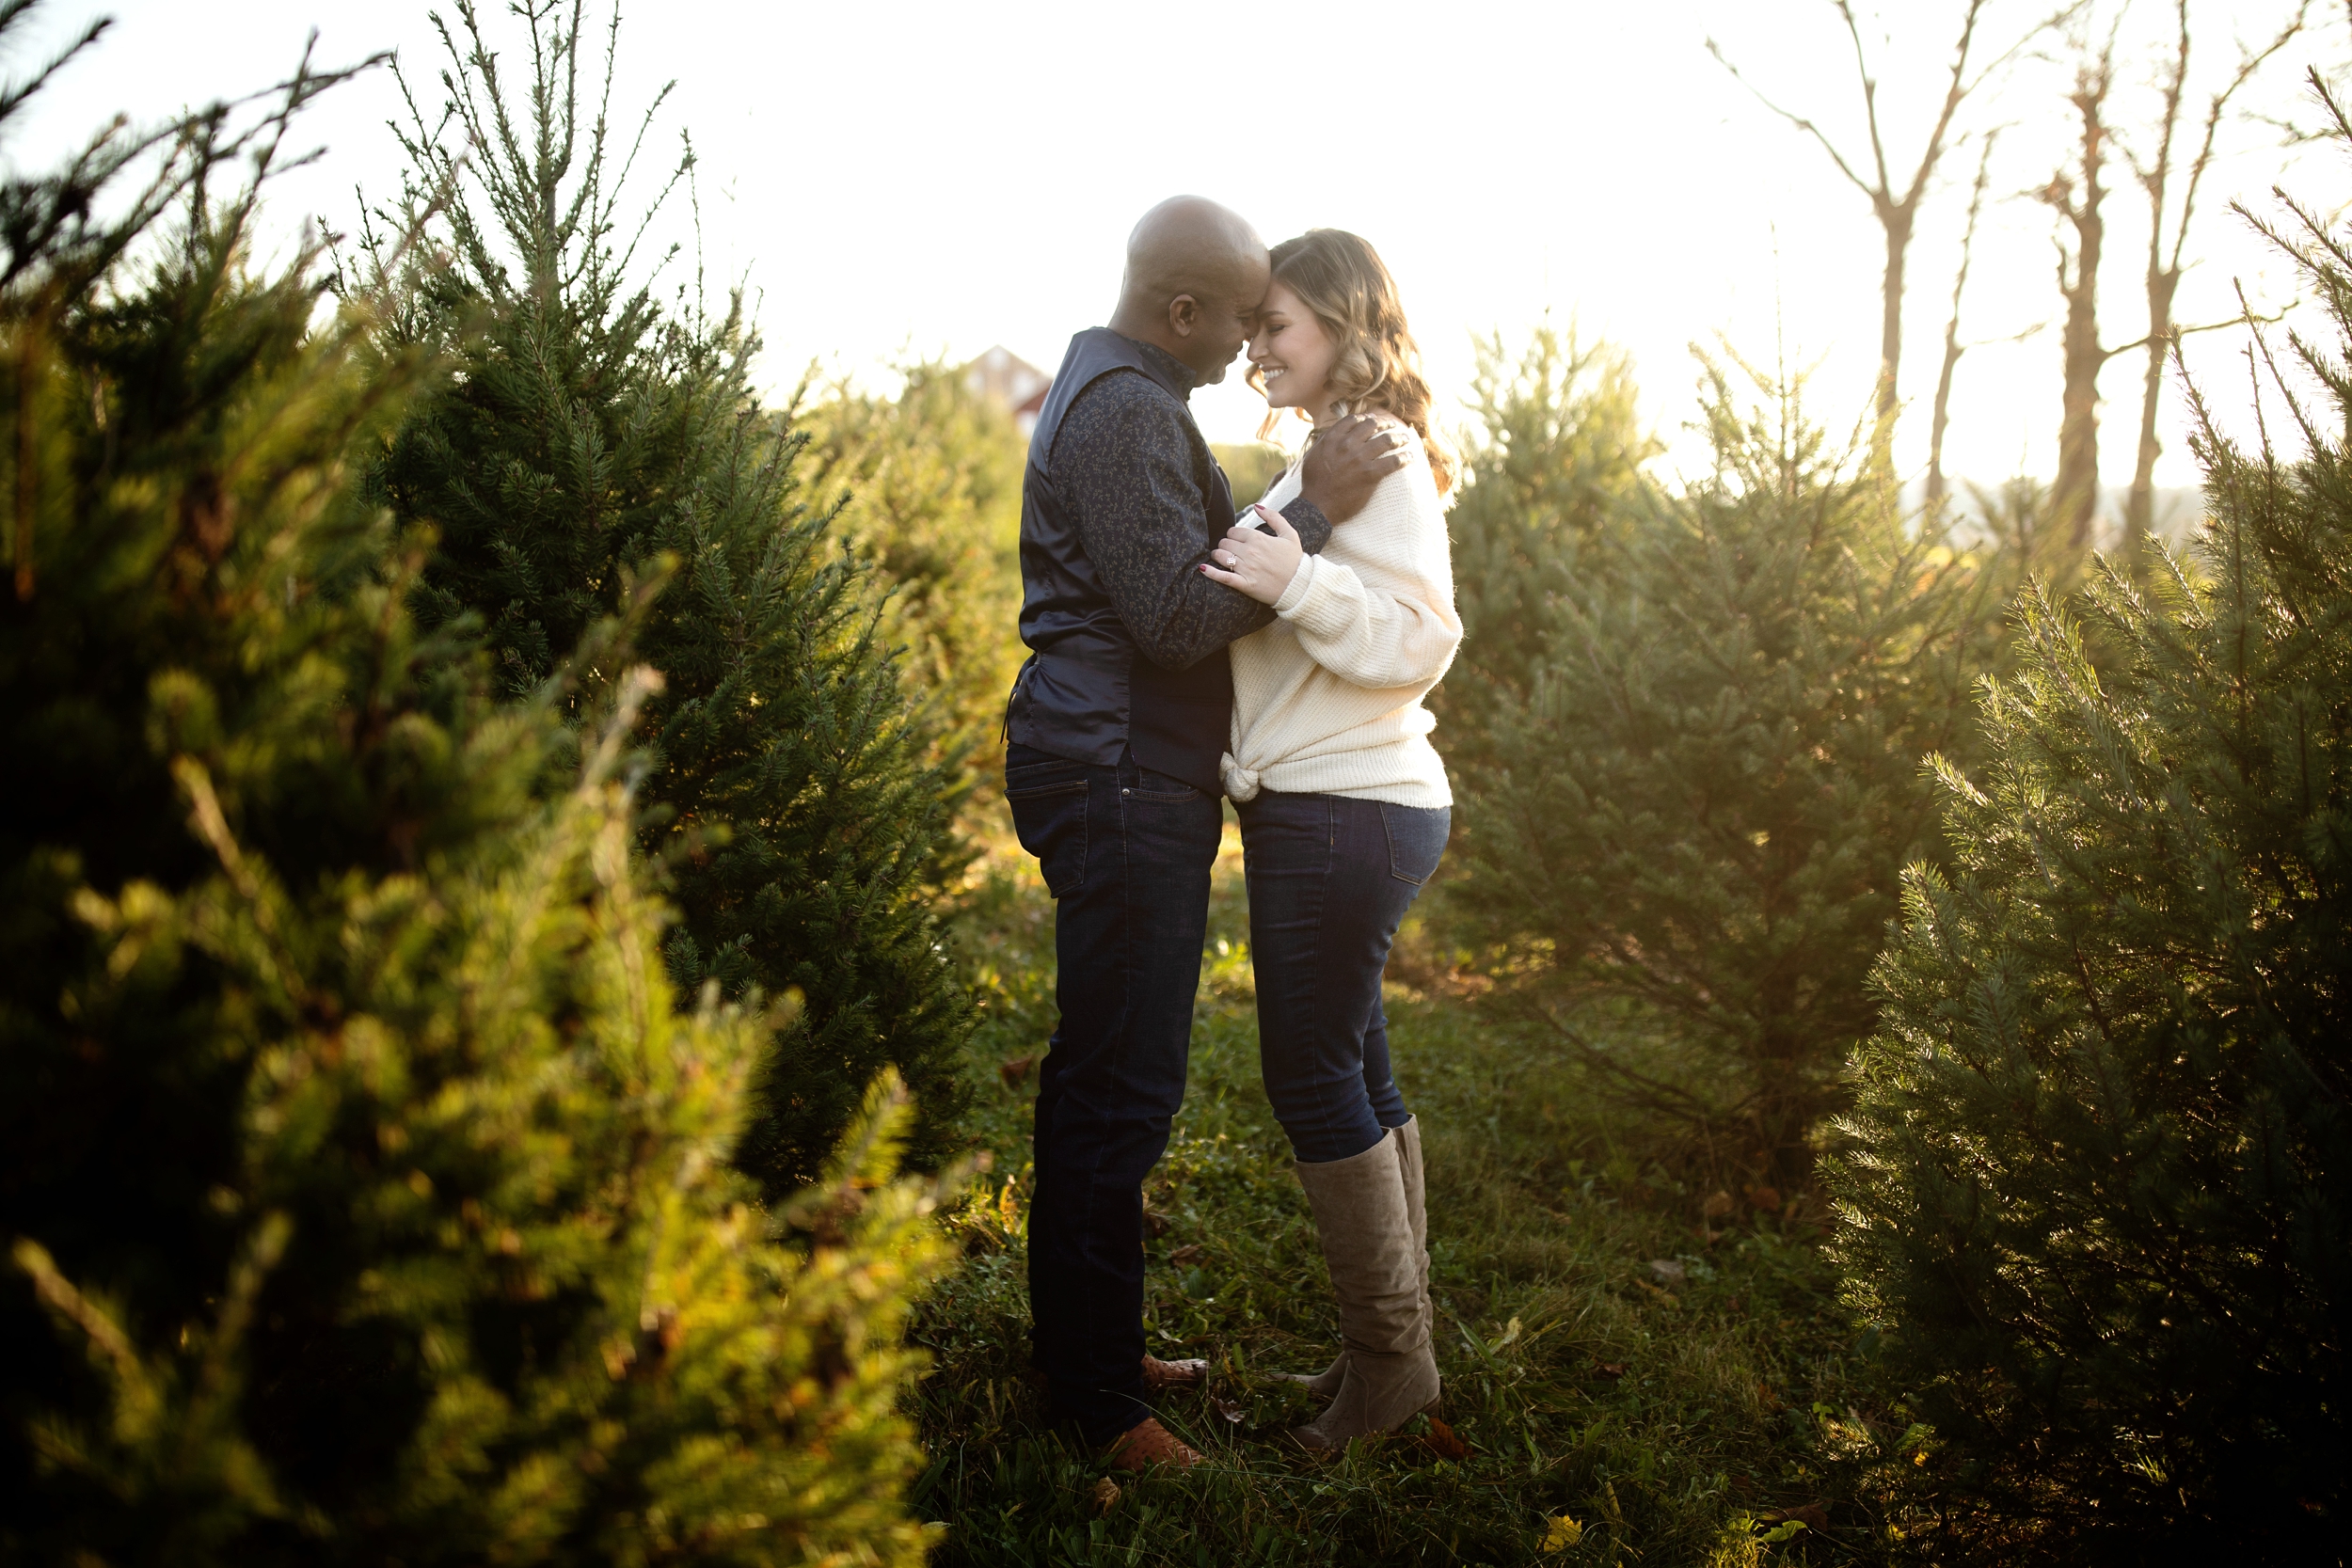 The Barns at Elizabeth Farms, Lancaster PA Christmas Tree Farm Engagement Photo Session, captured by Janae Rose Photography Lancaster PA Wedding Photographer